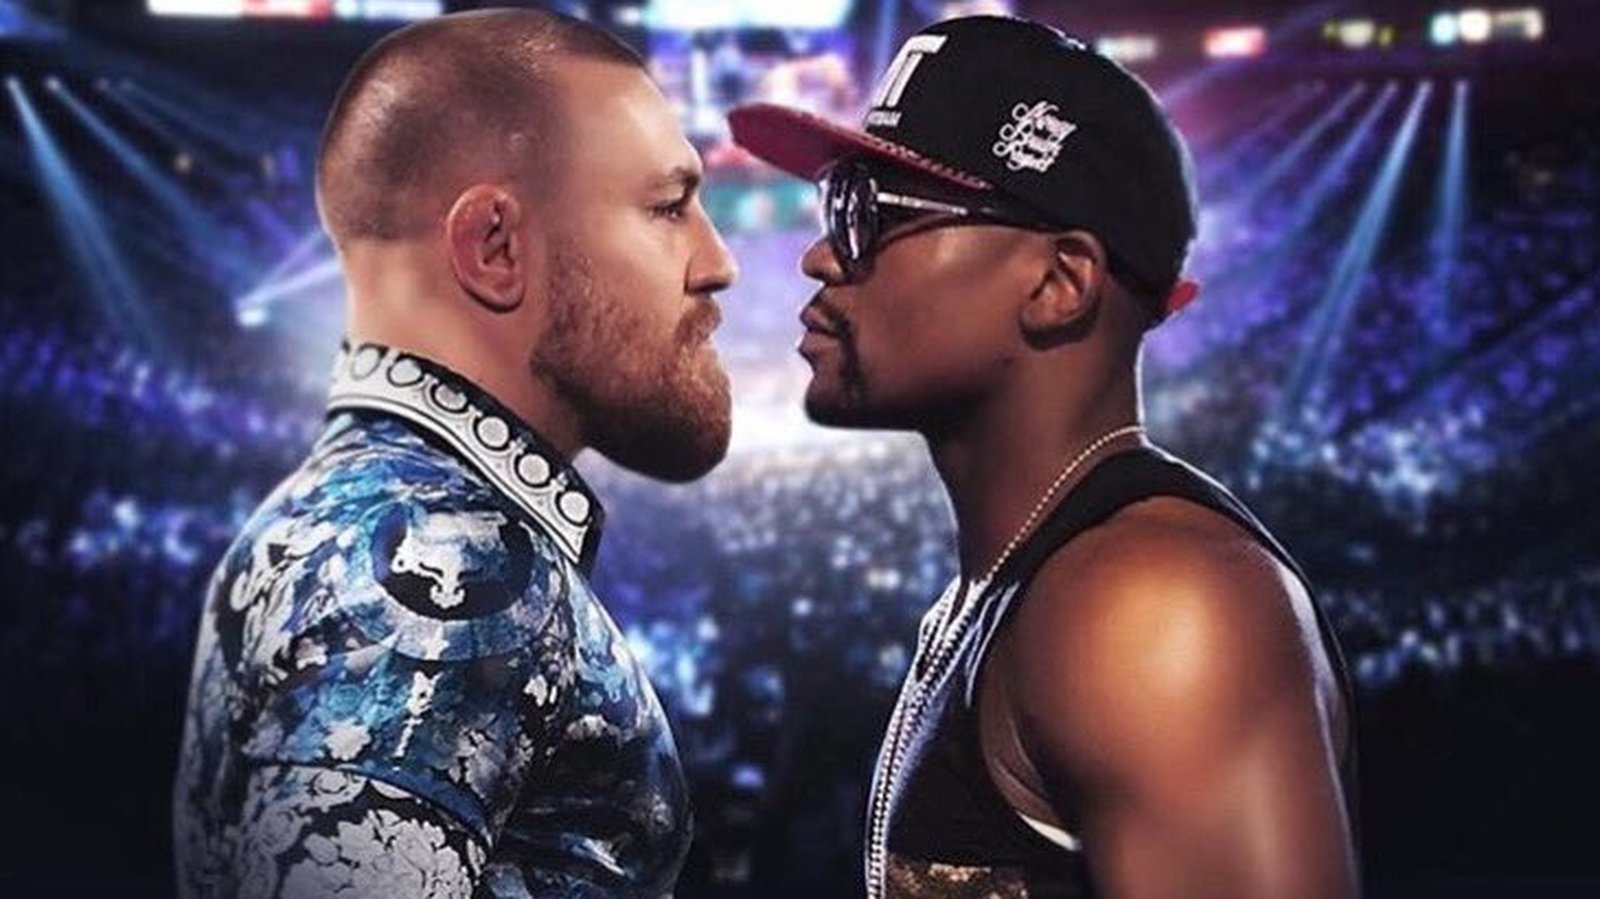 Conor McGregor fights Floyd Mayweather this evening: Why is it happening?